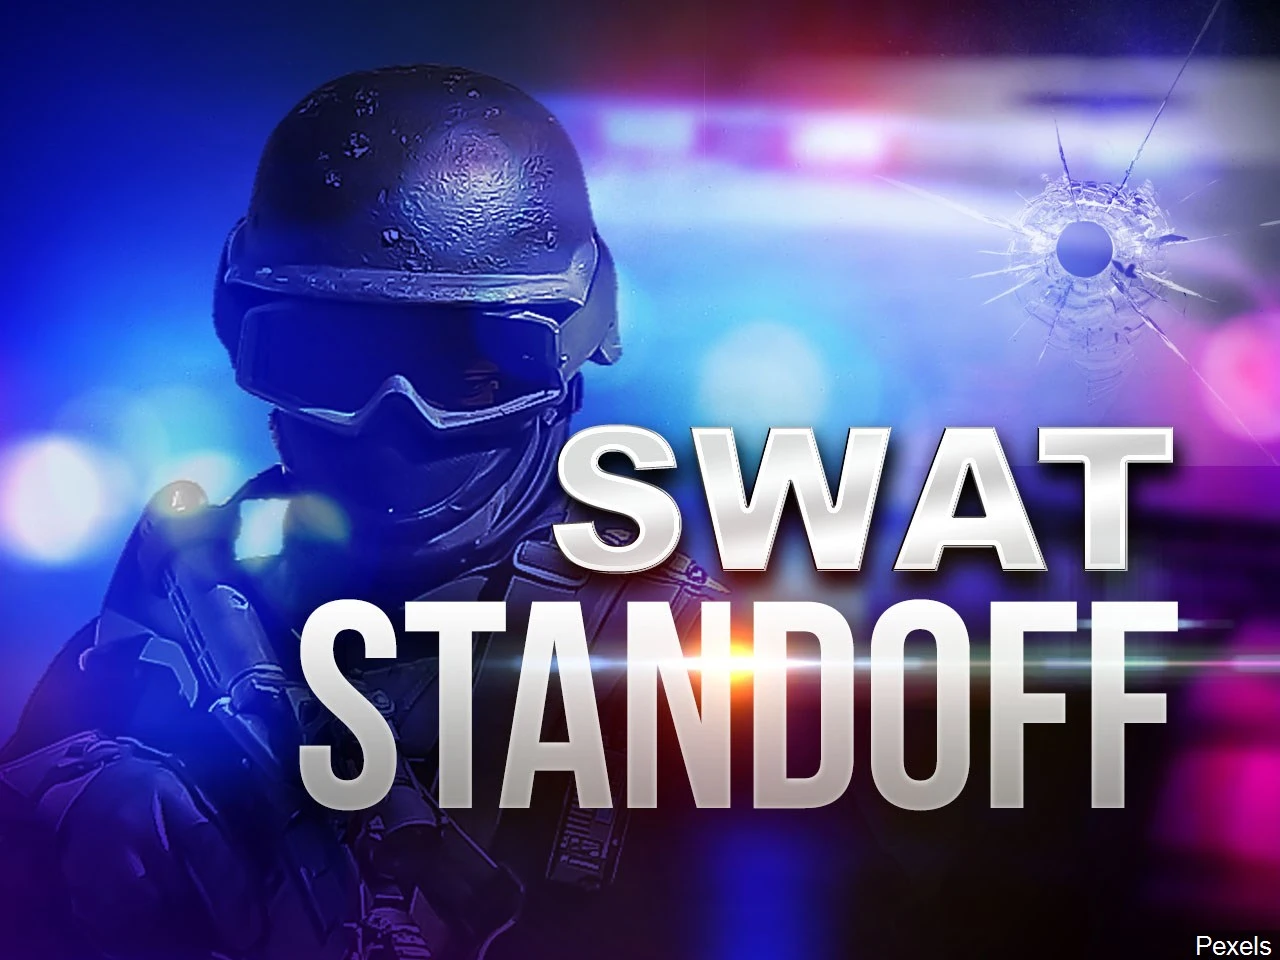 Wenatchee Woman Stages Lengthy Standoff With Police